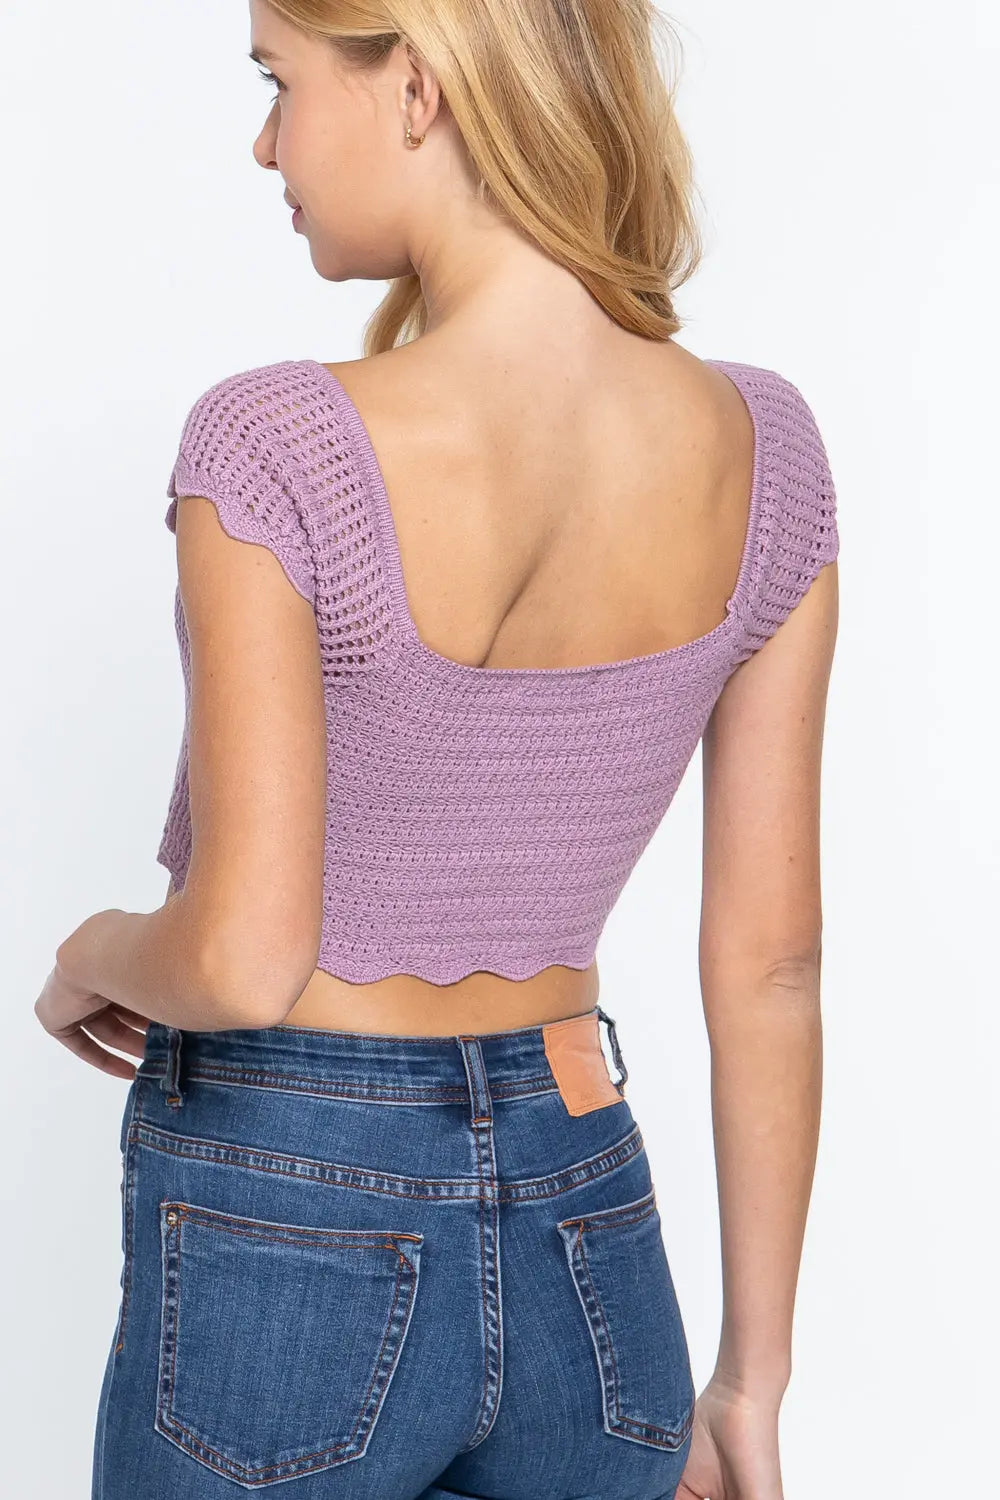 Short Sleeve V-neck Front Knot Detail Sweater Knit Crop Top Sunny EvE Fashion